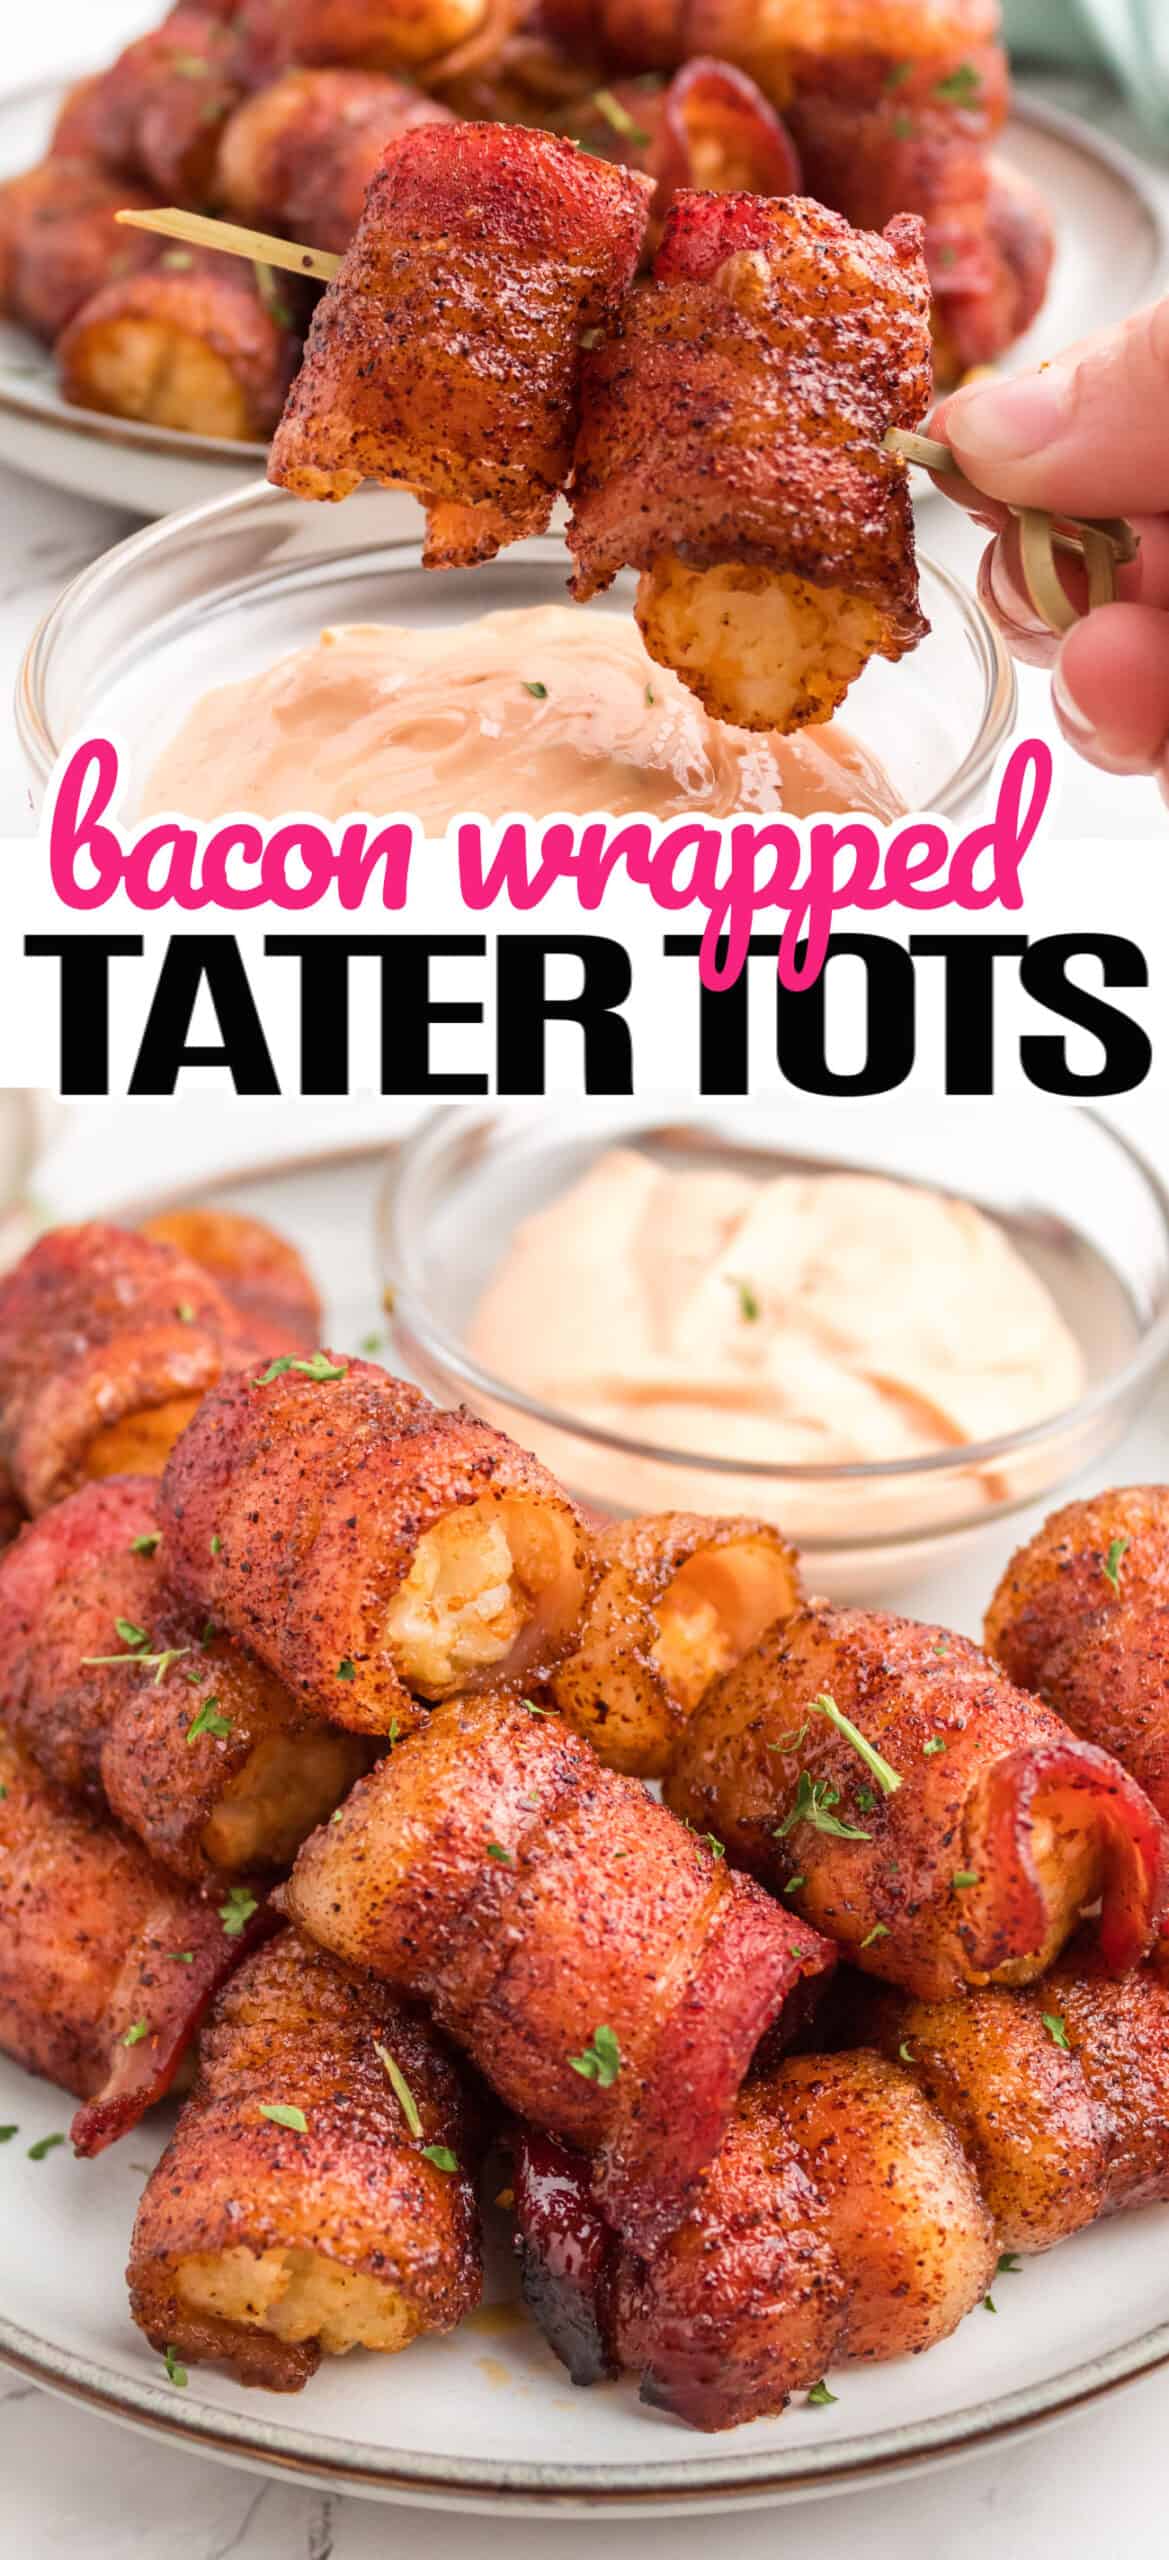 Sweet Bacon Wrapped Tater Tots Recipe with Video ⋆ Real Housemoms